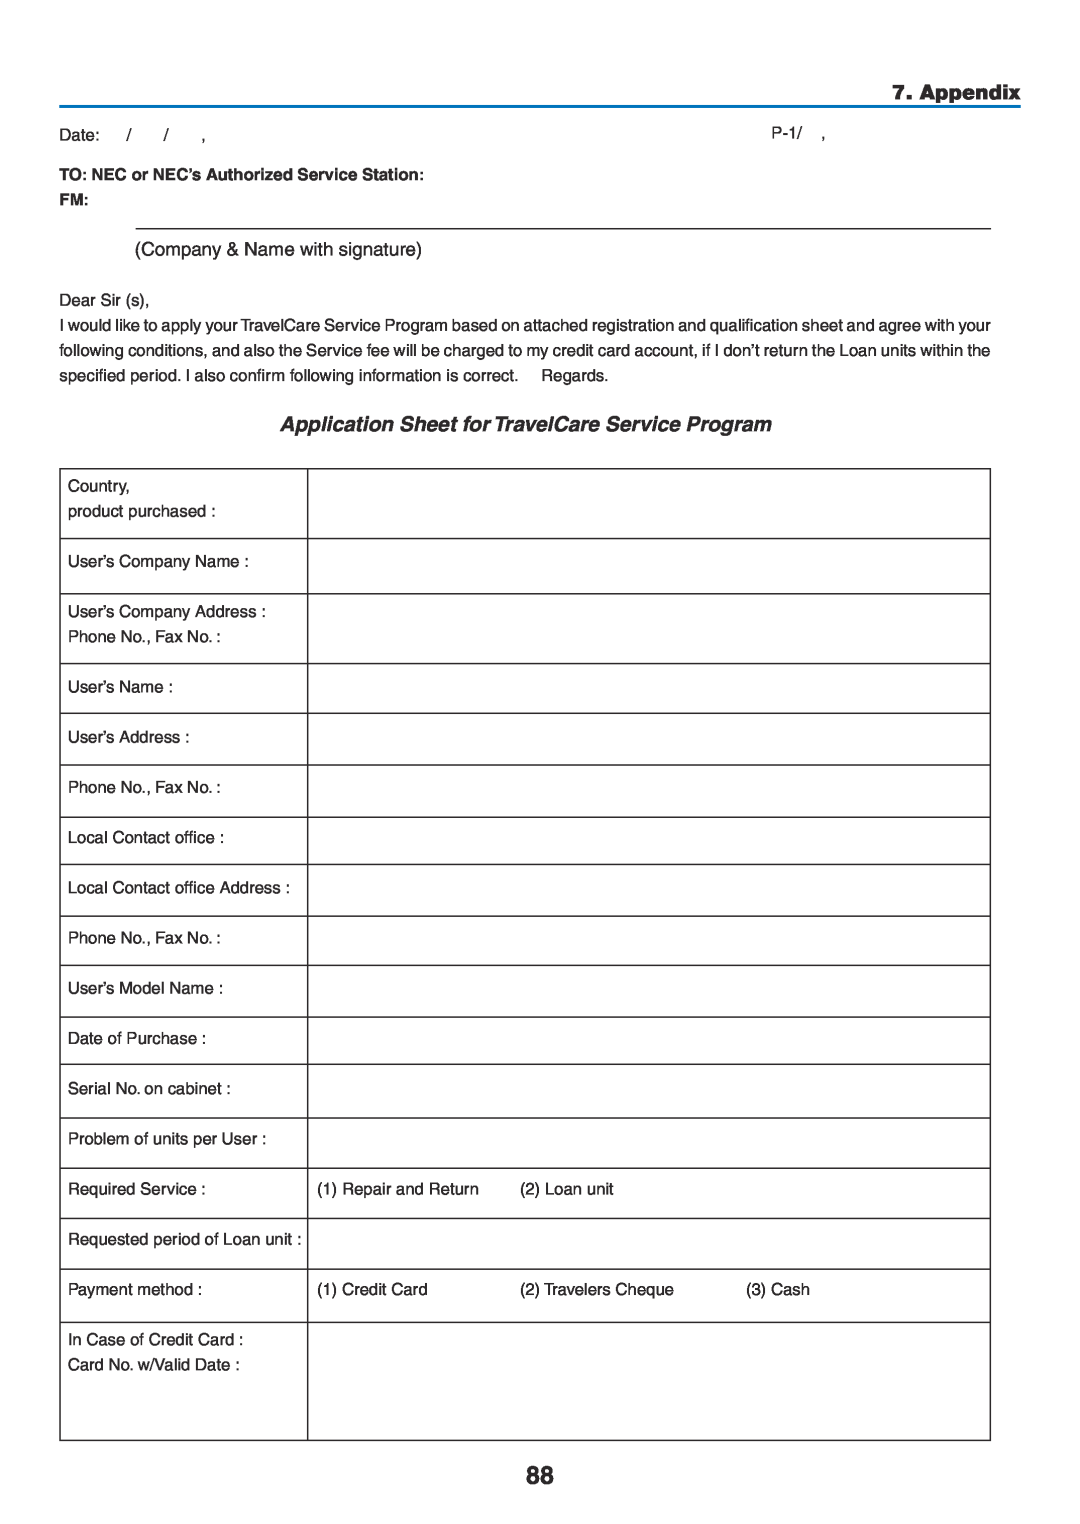 NEC NP400G, NP600G, NP500WG Appendix, Application Sheet for TravelCare Service Program, Company & Name with signature 